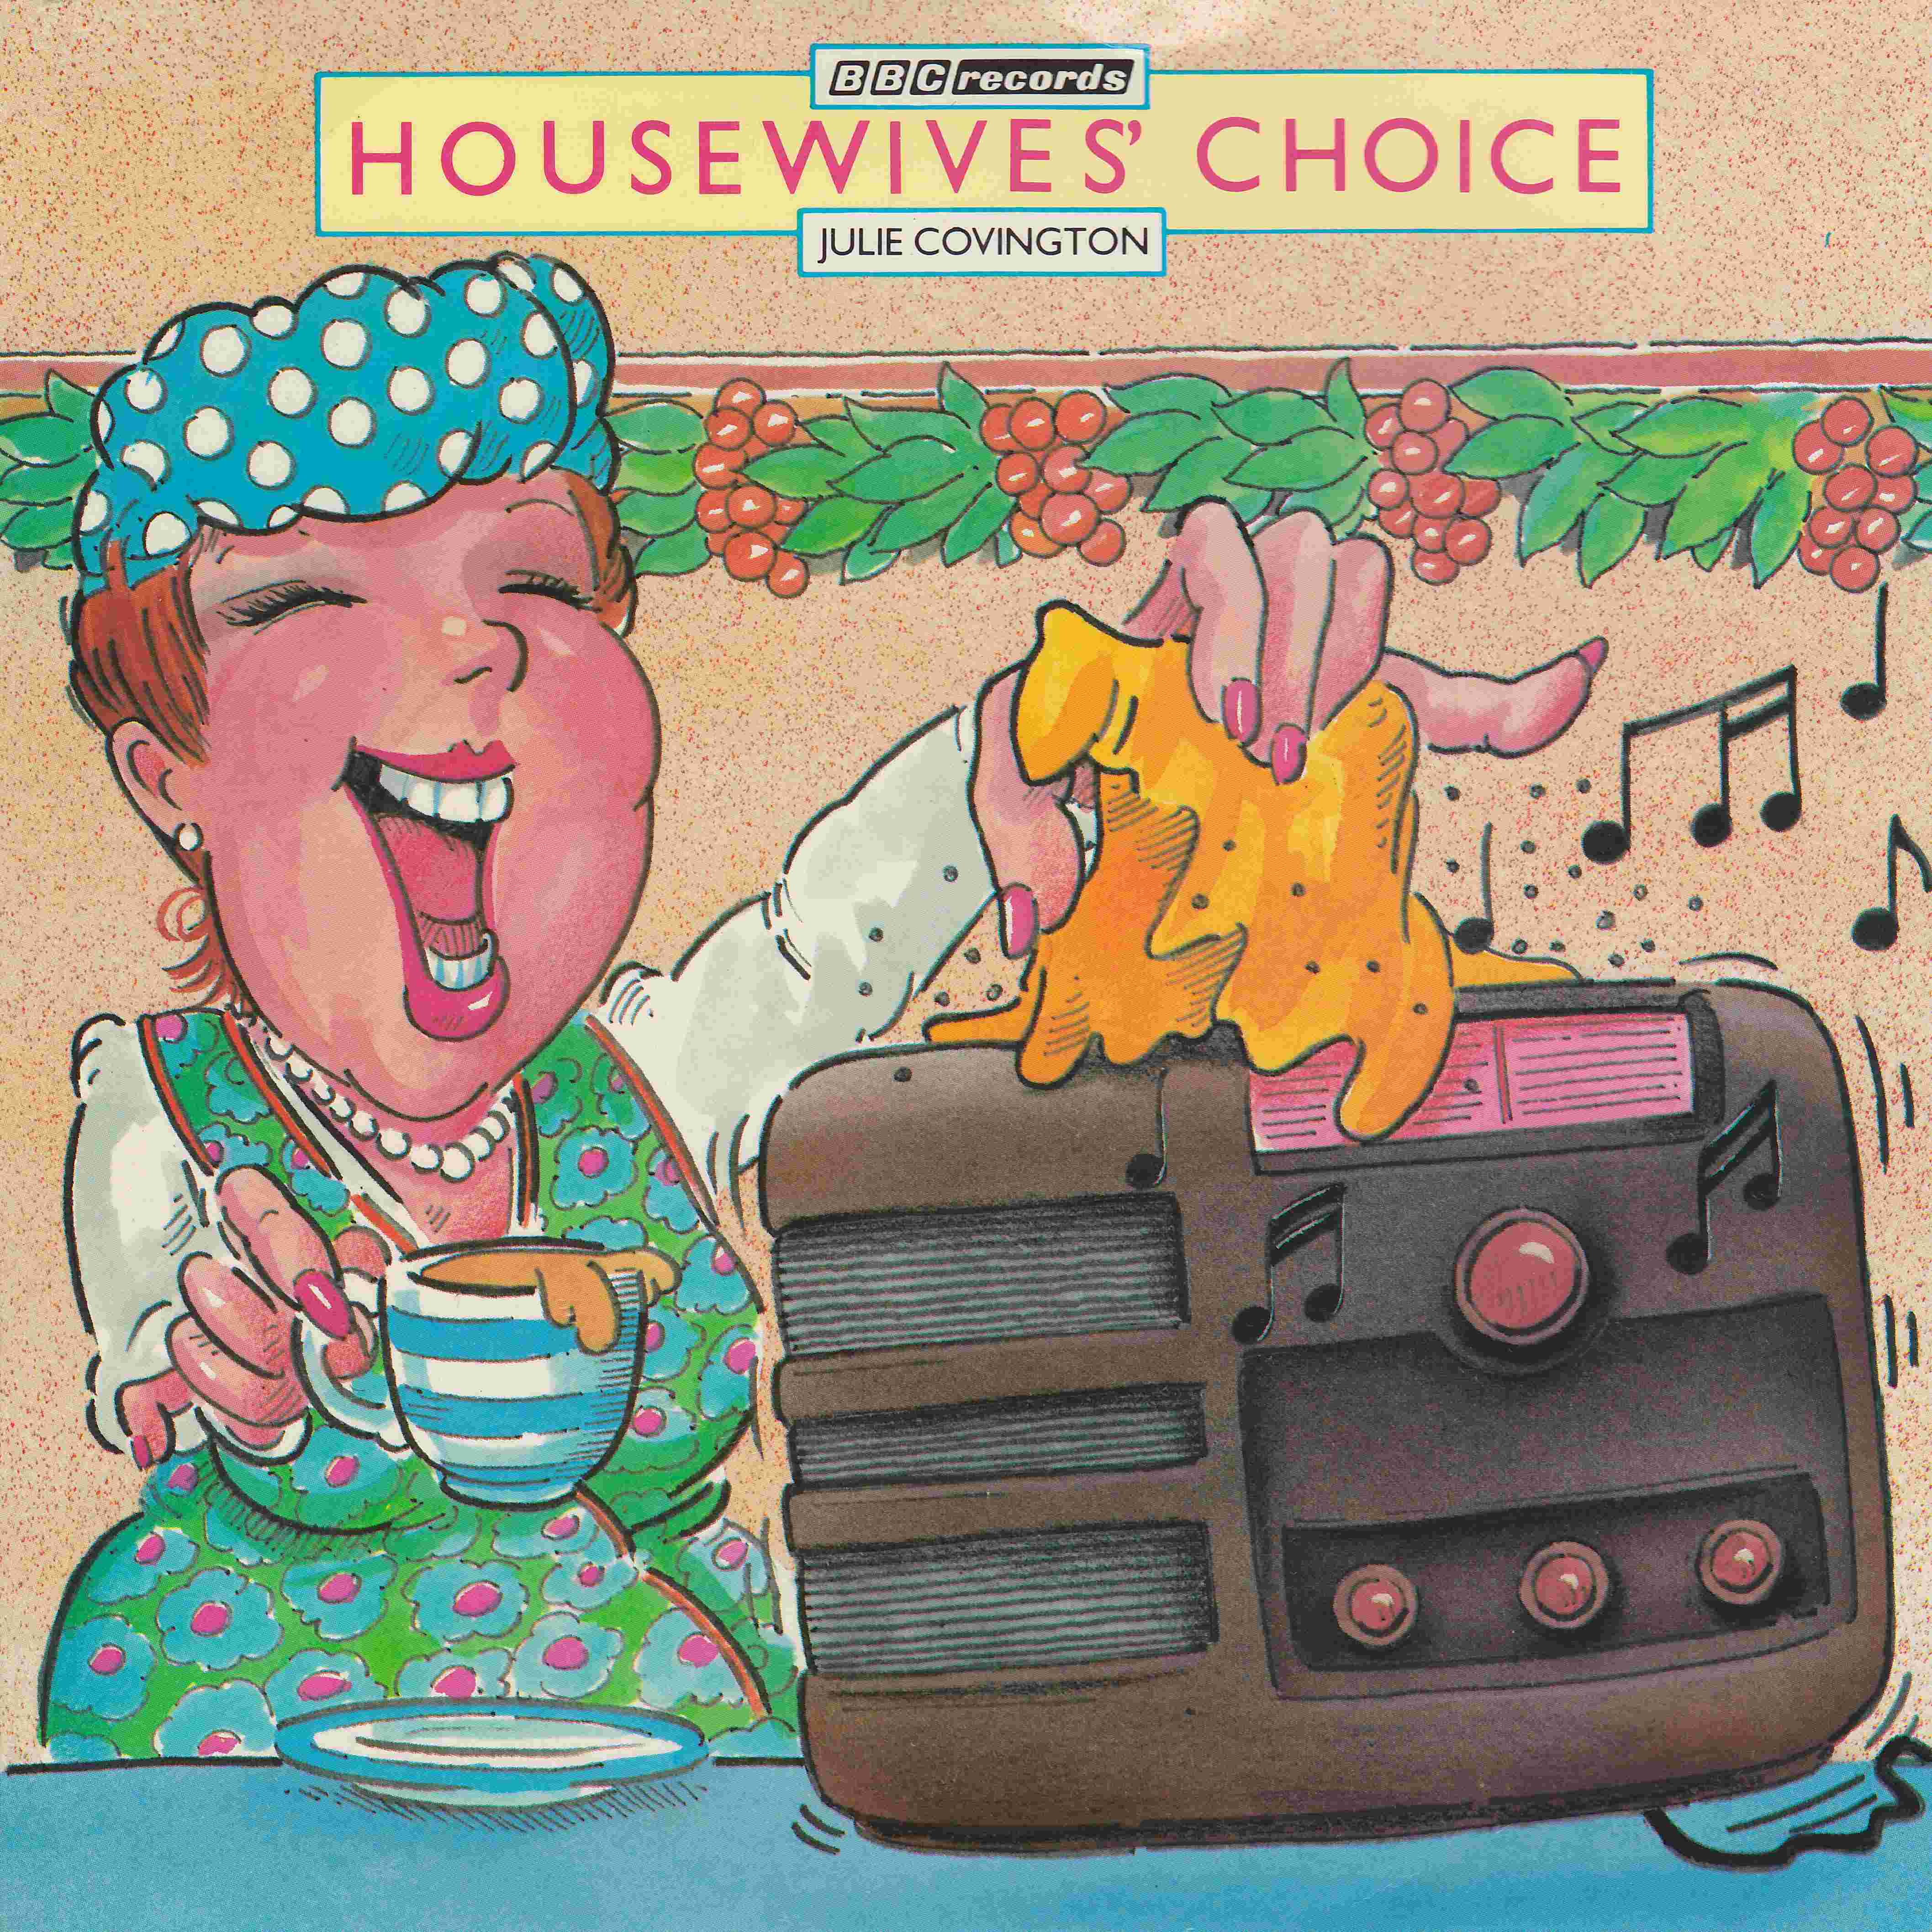 Picture of RESL 123 In party mood (Housewives' choice) by artist Julie Covington from the BBC singles - Records and Tapes library